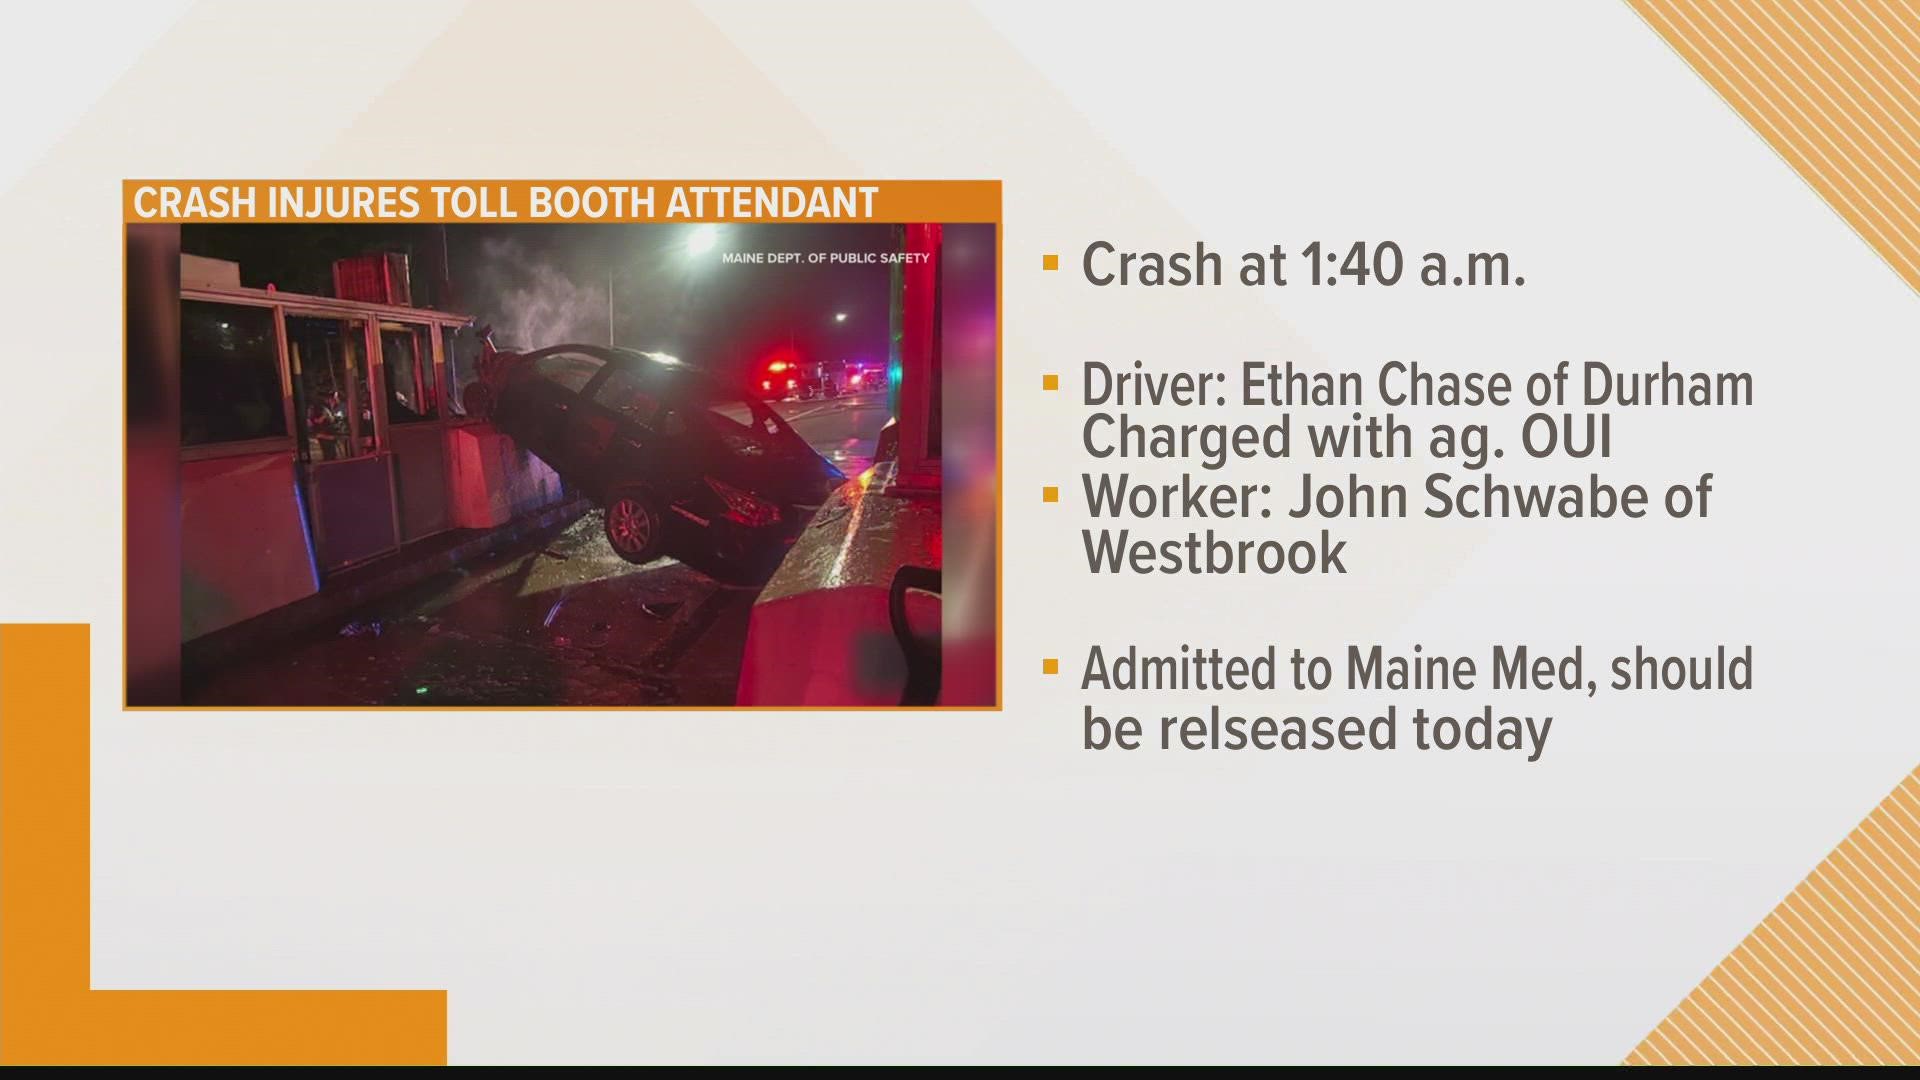 Thursday morning a car crash at the toll booth on the Falmouth spur left one booth attendant seriously injured.